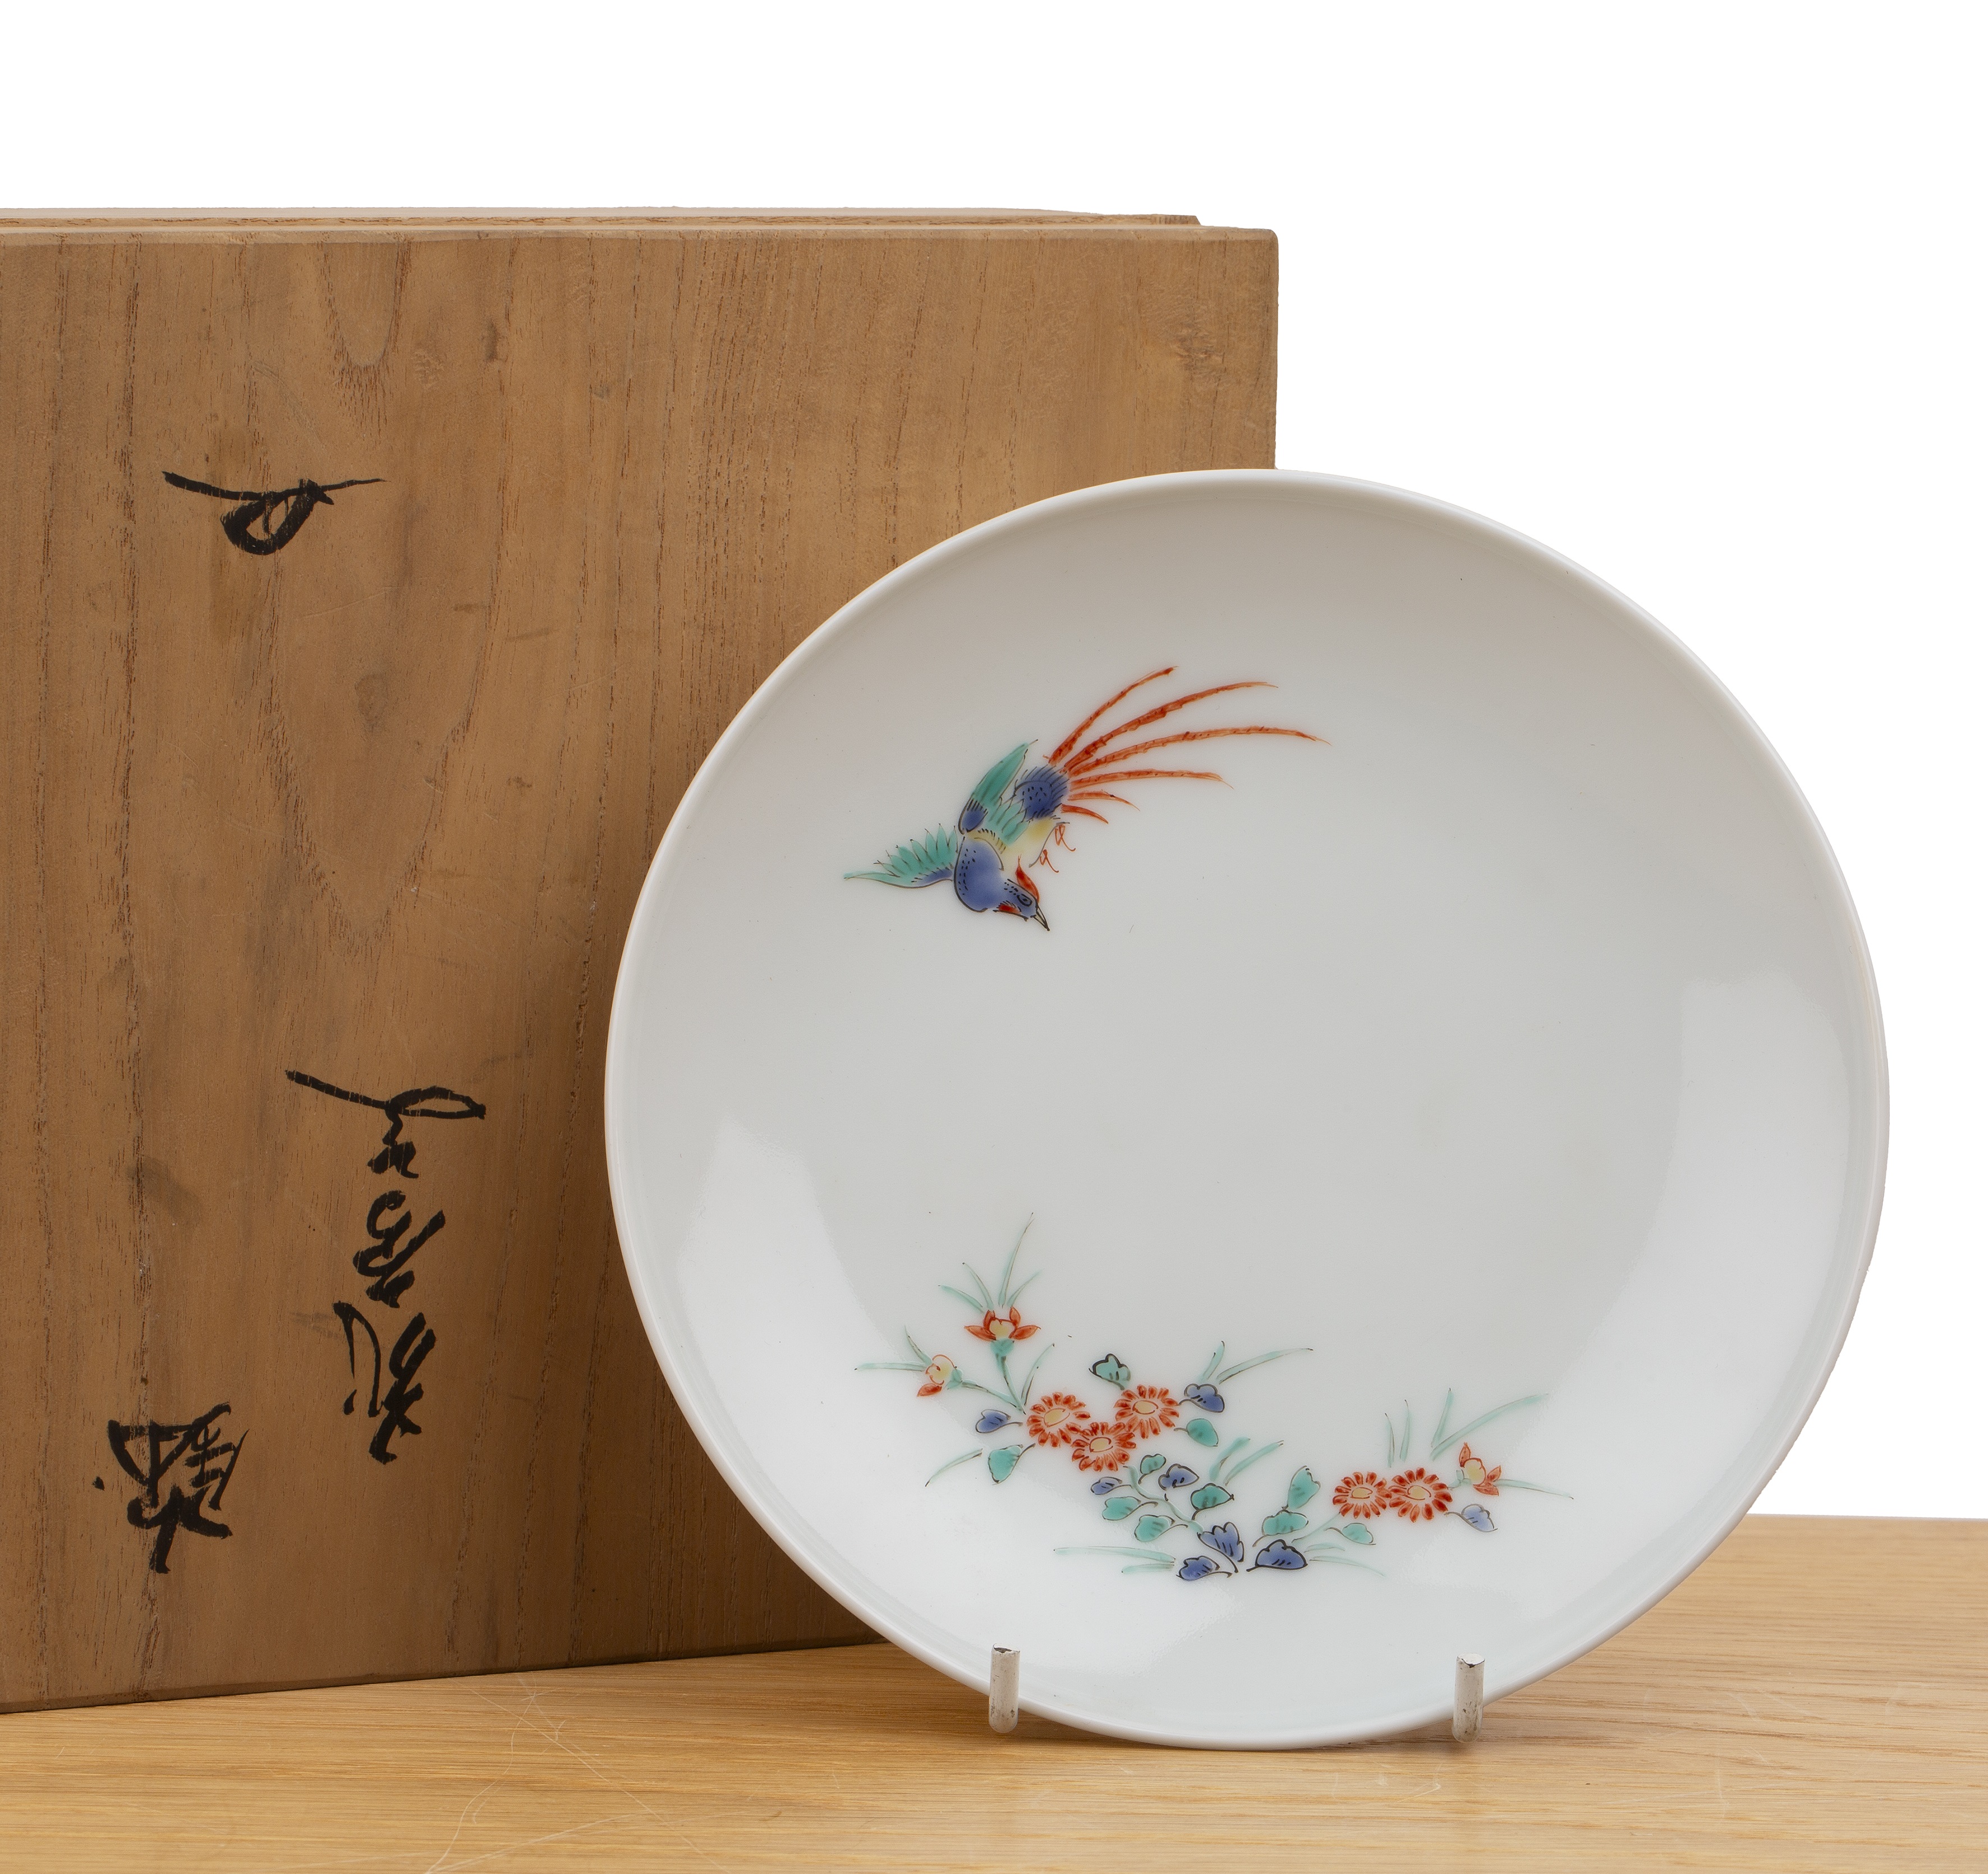 Kakiemon saucer dish Japanese in a collectors case, red seal to the interior lid of the case, the